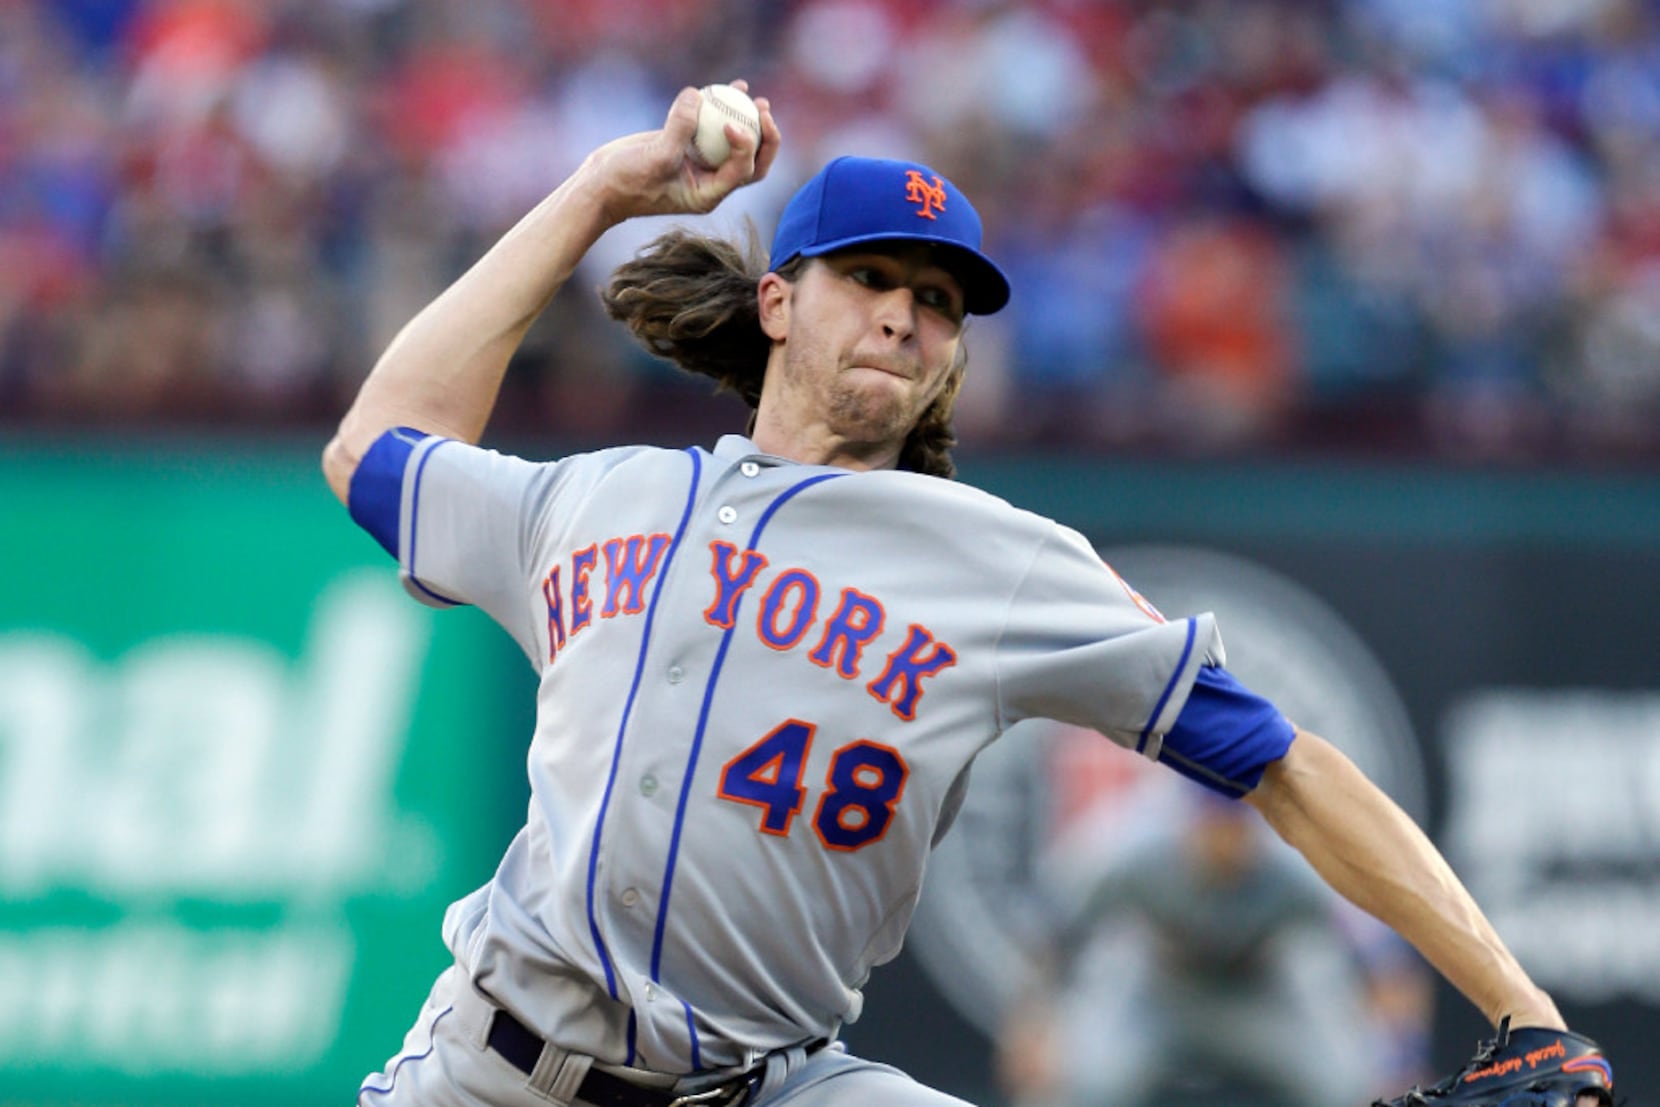 Three stats behind Jacob deGrom's historic start for Mets